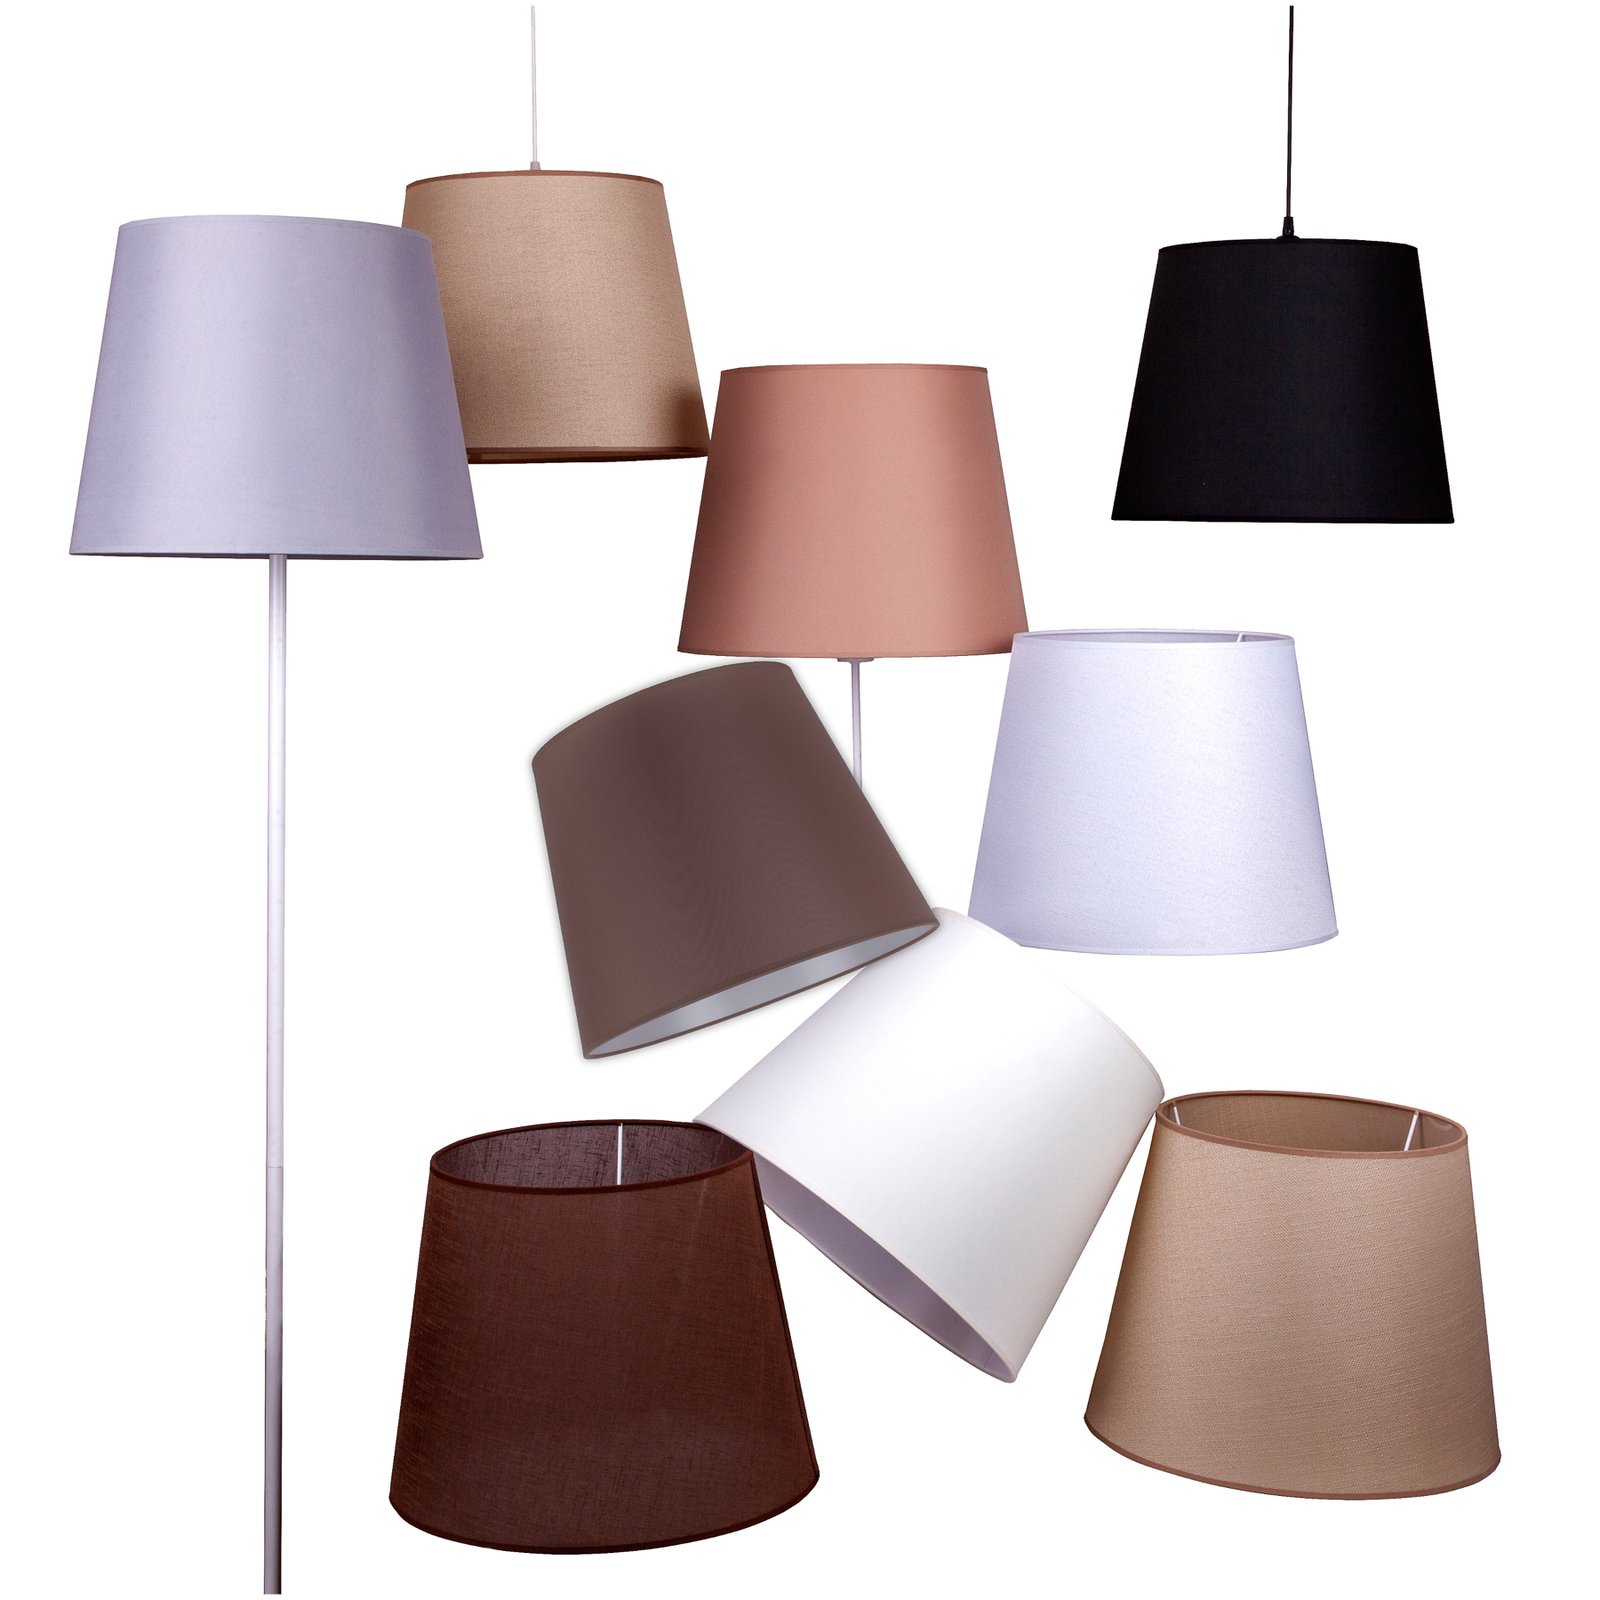 Classic L lampshade for floor lamps, white